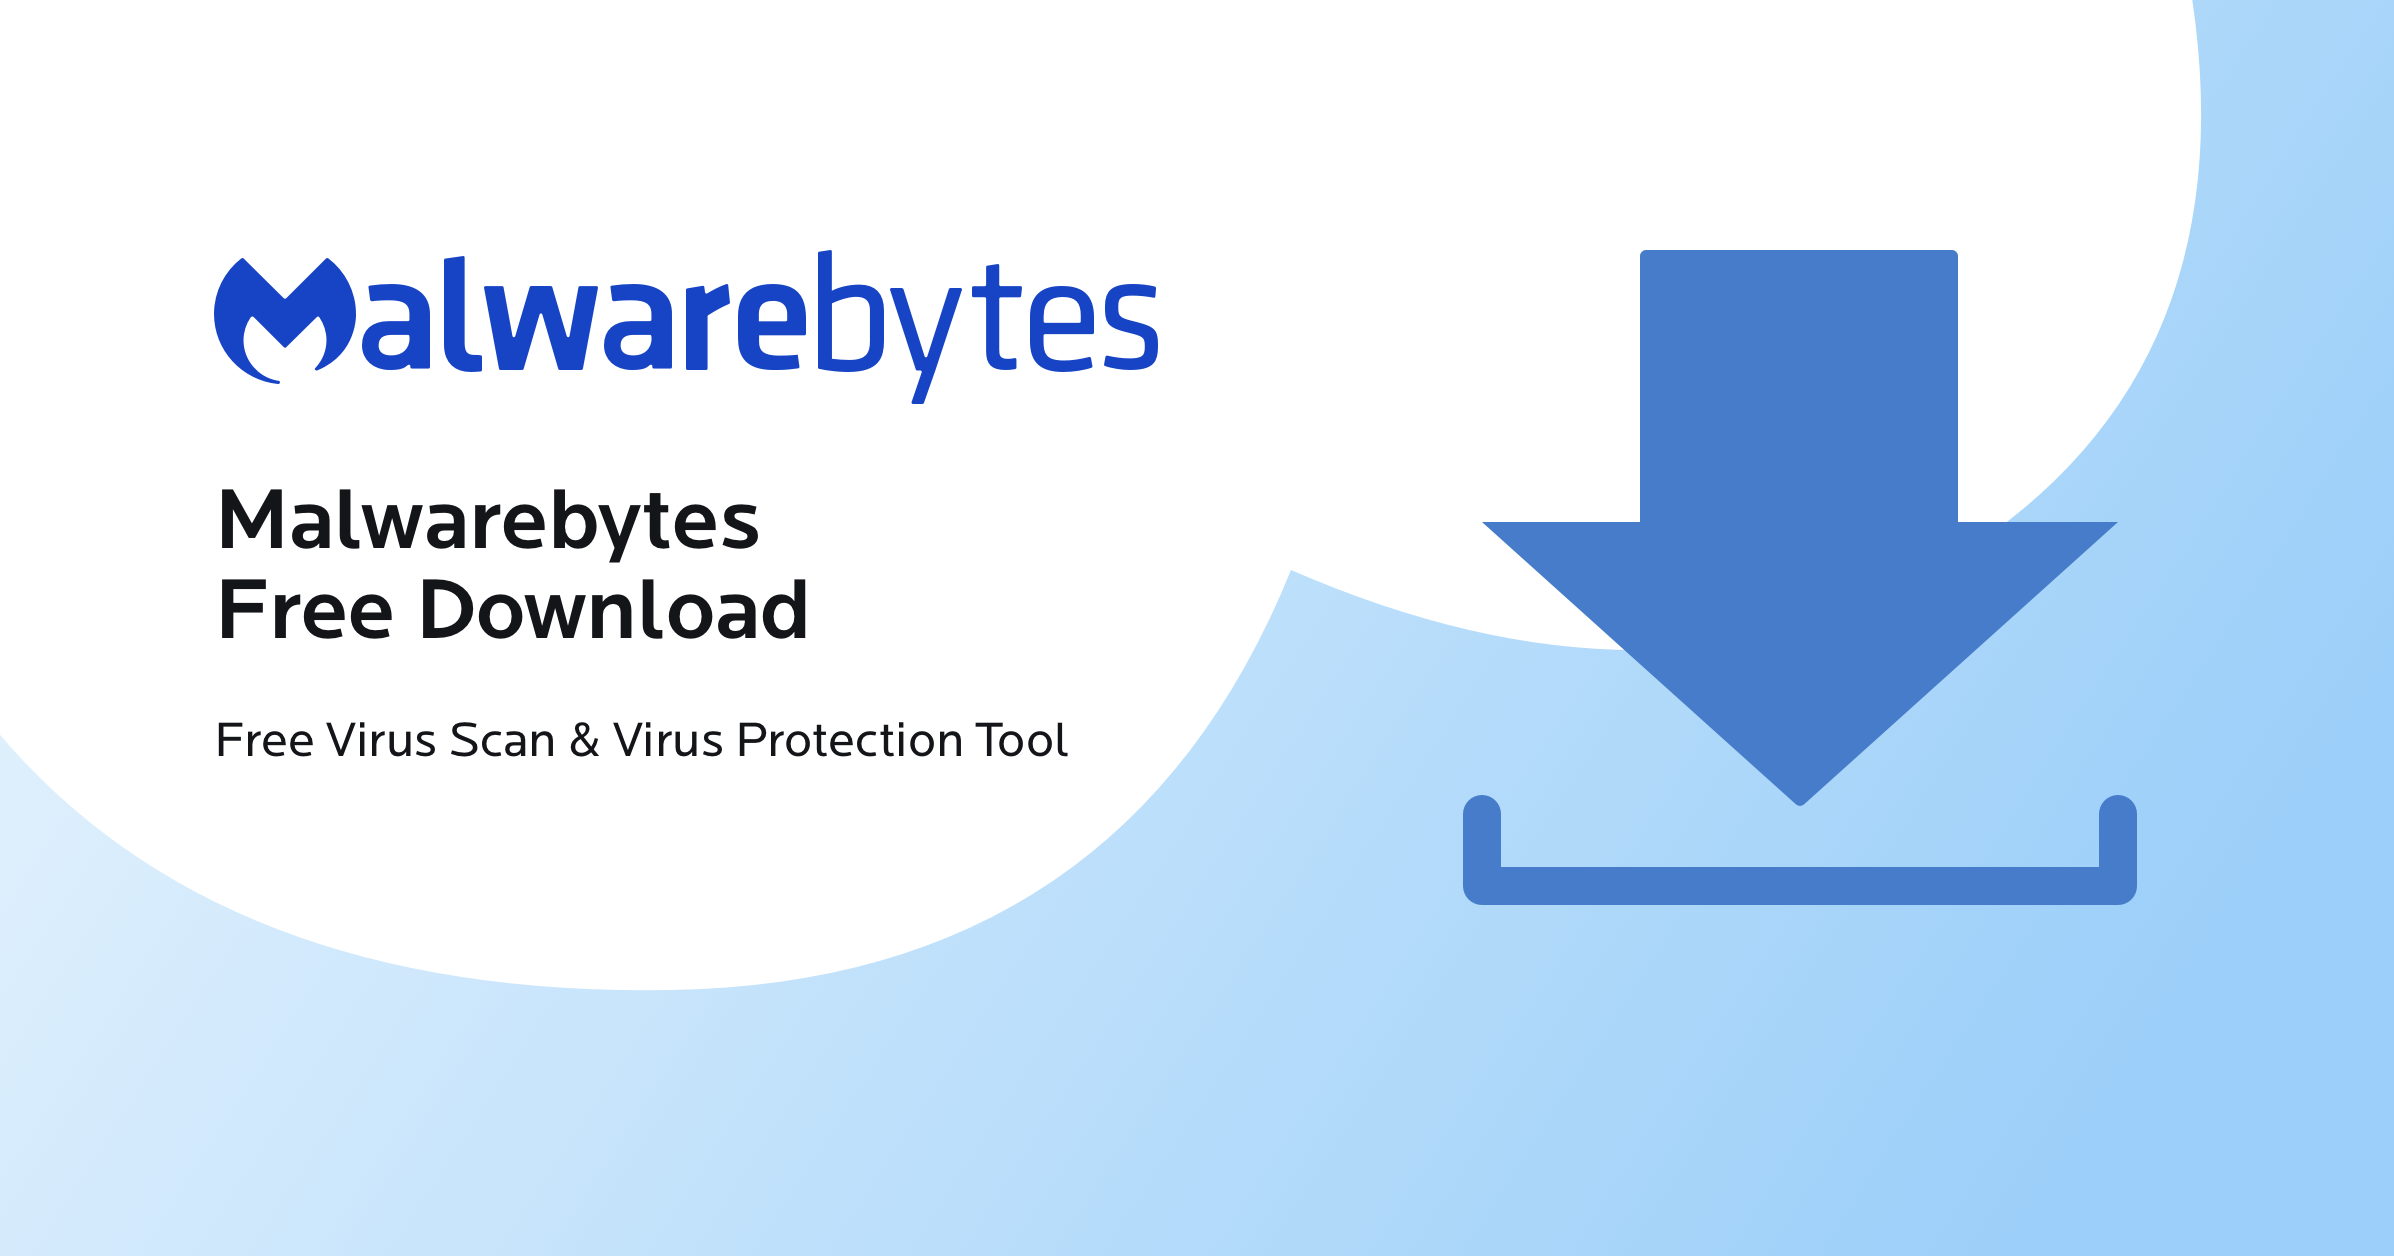 Download and install reputable anti-malware software.
Update the anti-malware software to ensure it has the latest virus definitions.